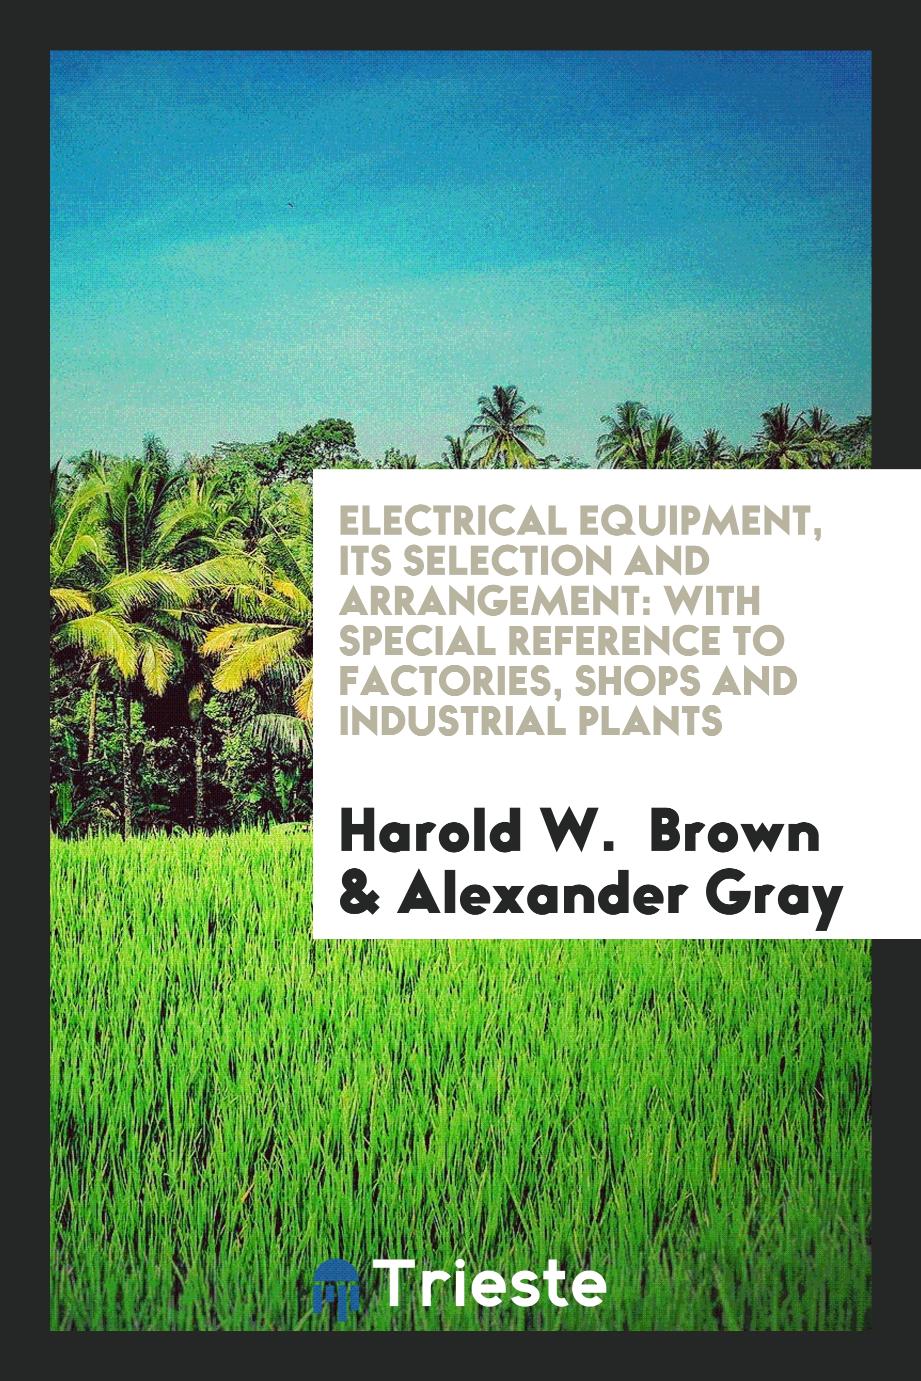 Electrical Equipment, Its Selection and Arrangement: With Special Reference to Factories, Shops and Industrial Plants